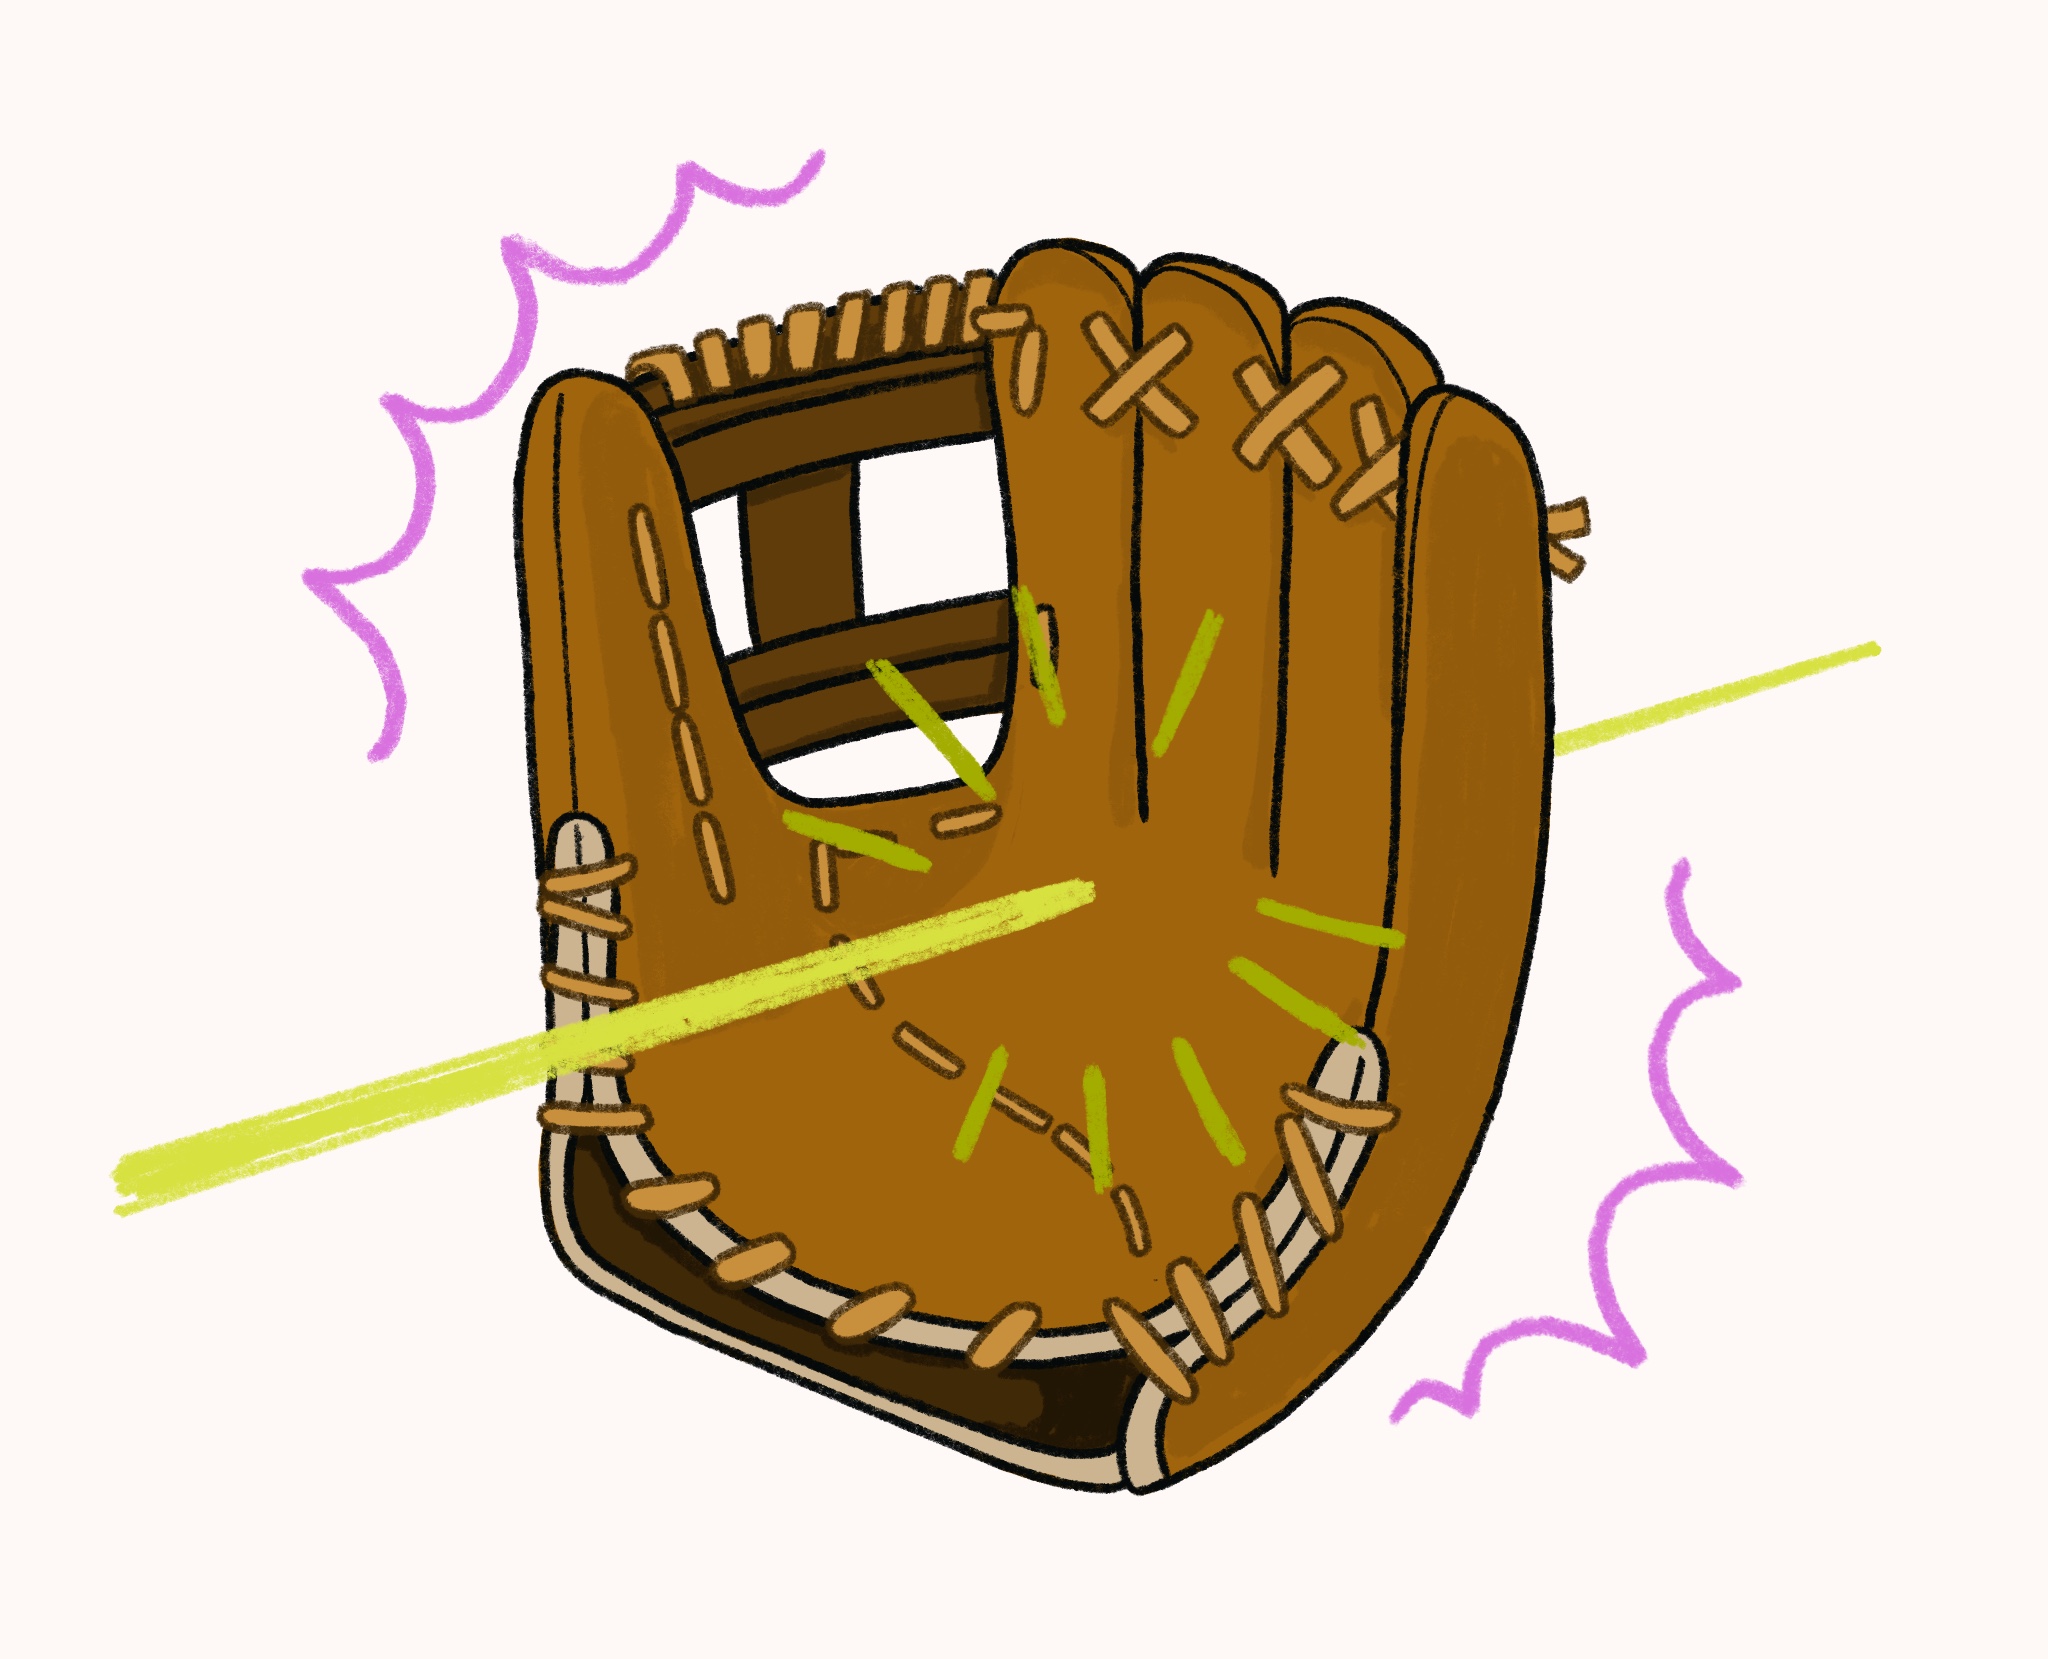 Illustration of a baseball glove trying to catch a muon